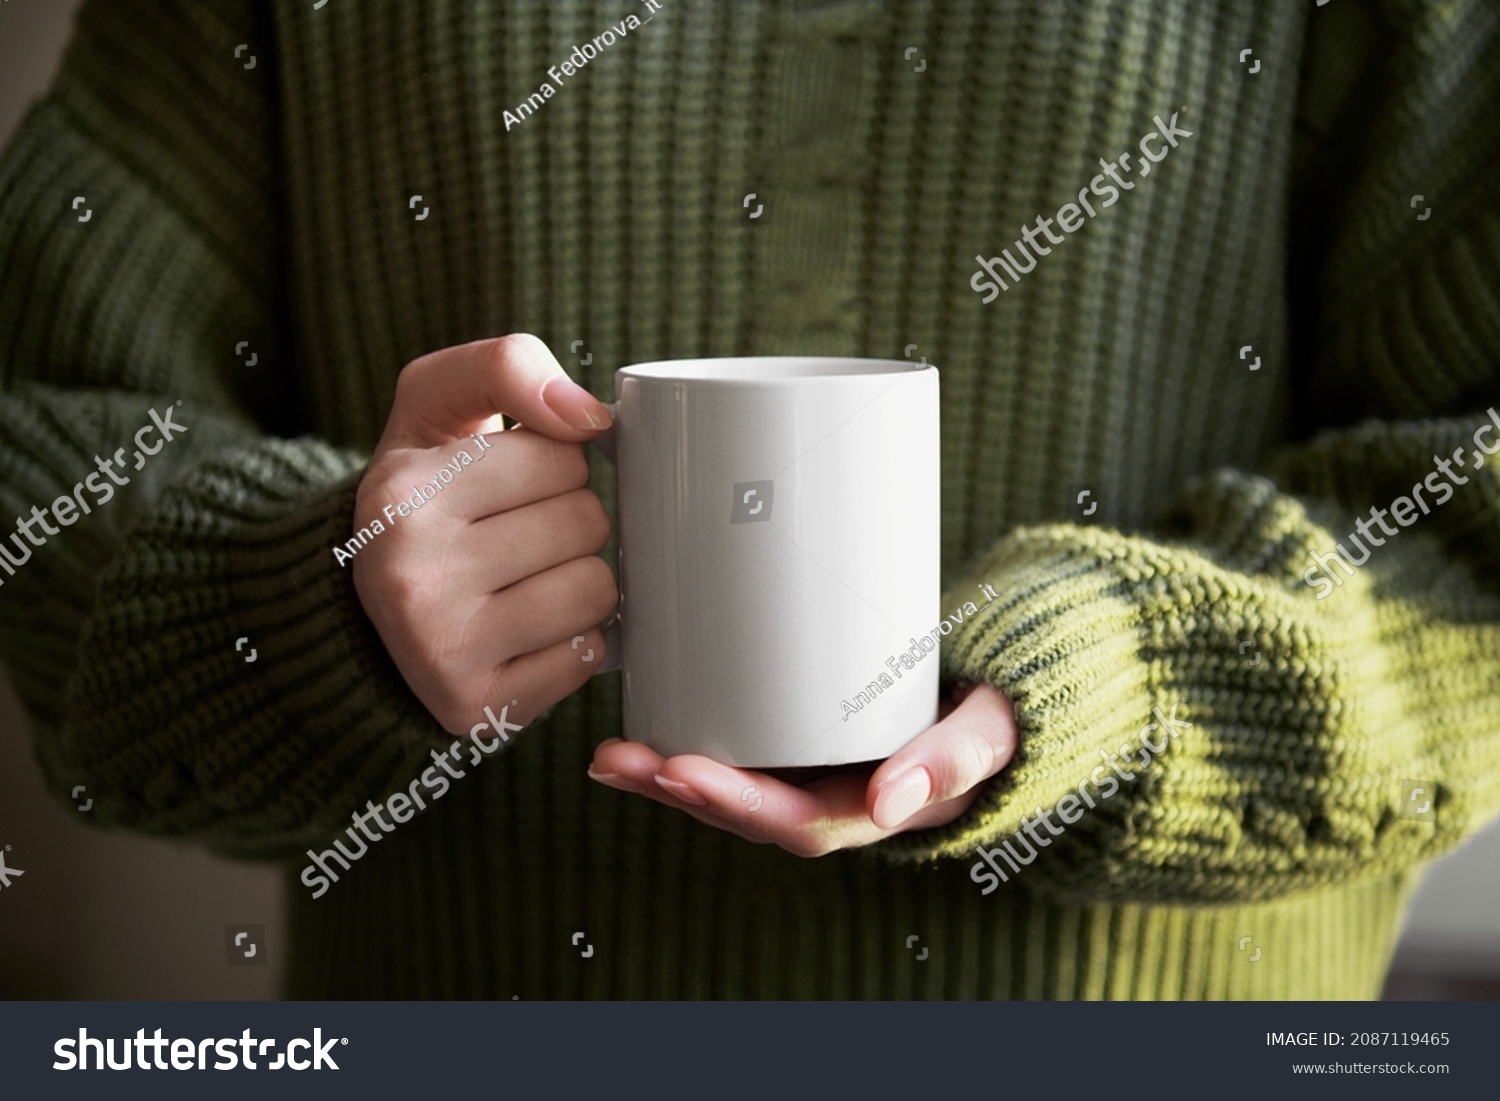 female hand holding white mug with blank copy space for your advertising text message or promotional content, sweet coffee or tea. Girl in green sweater holding white porcelain mug mock up #2087119465